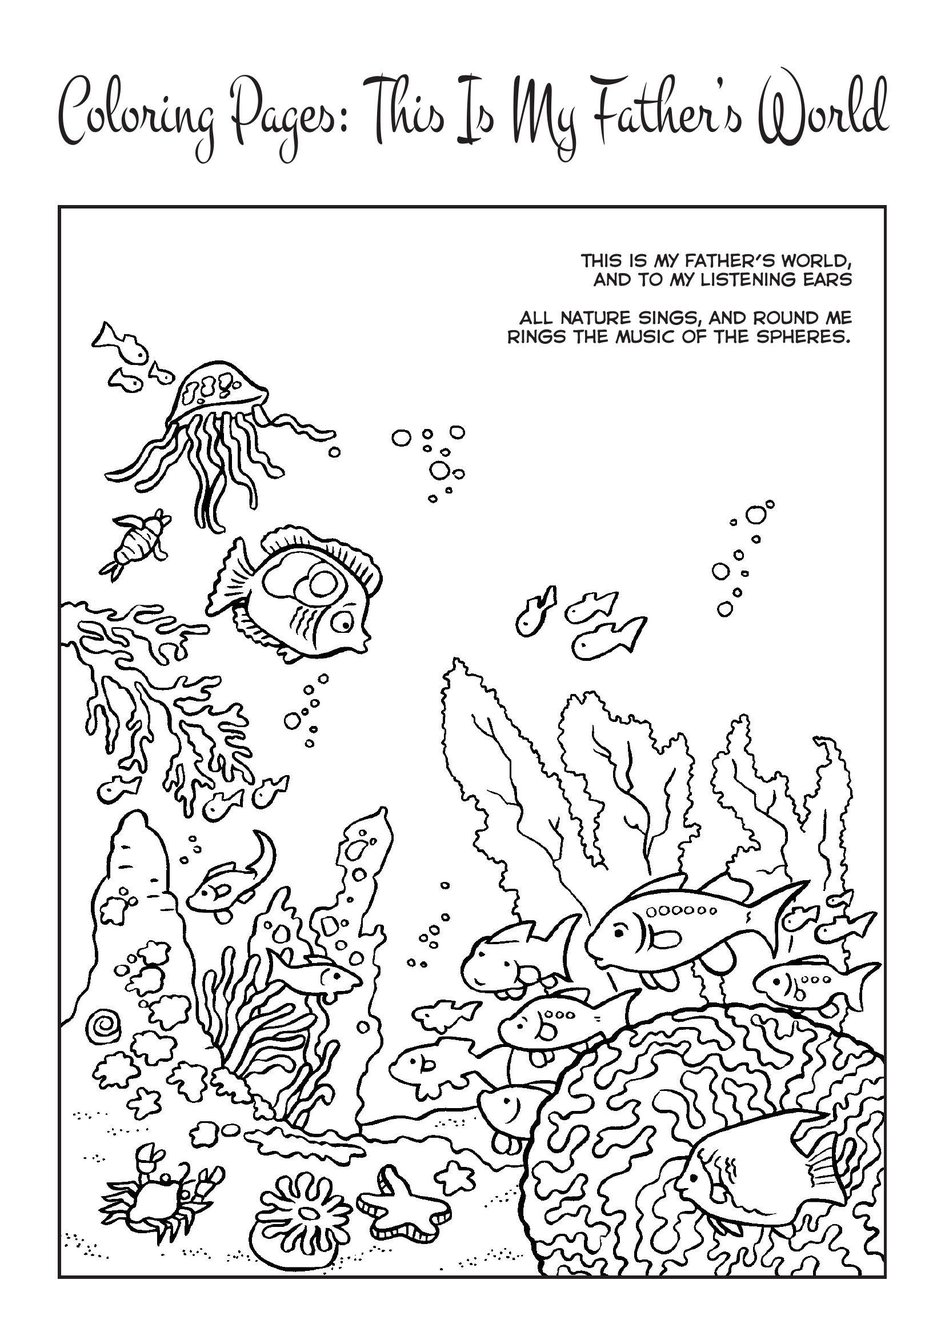 listening ears coloring page